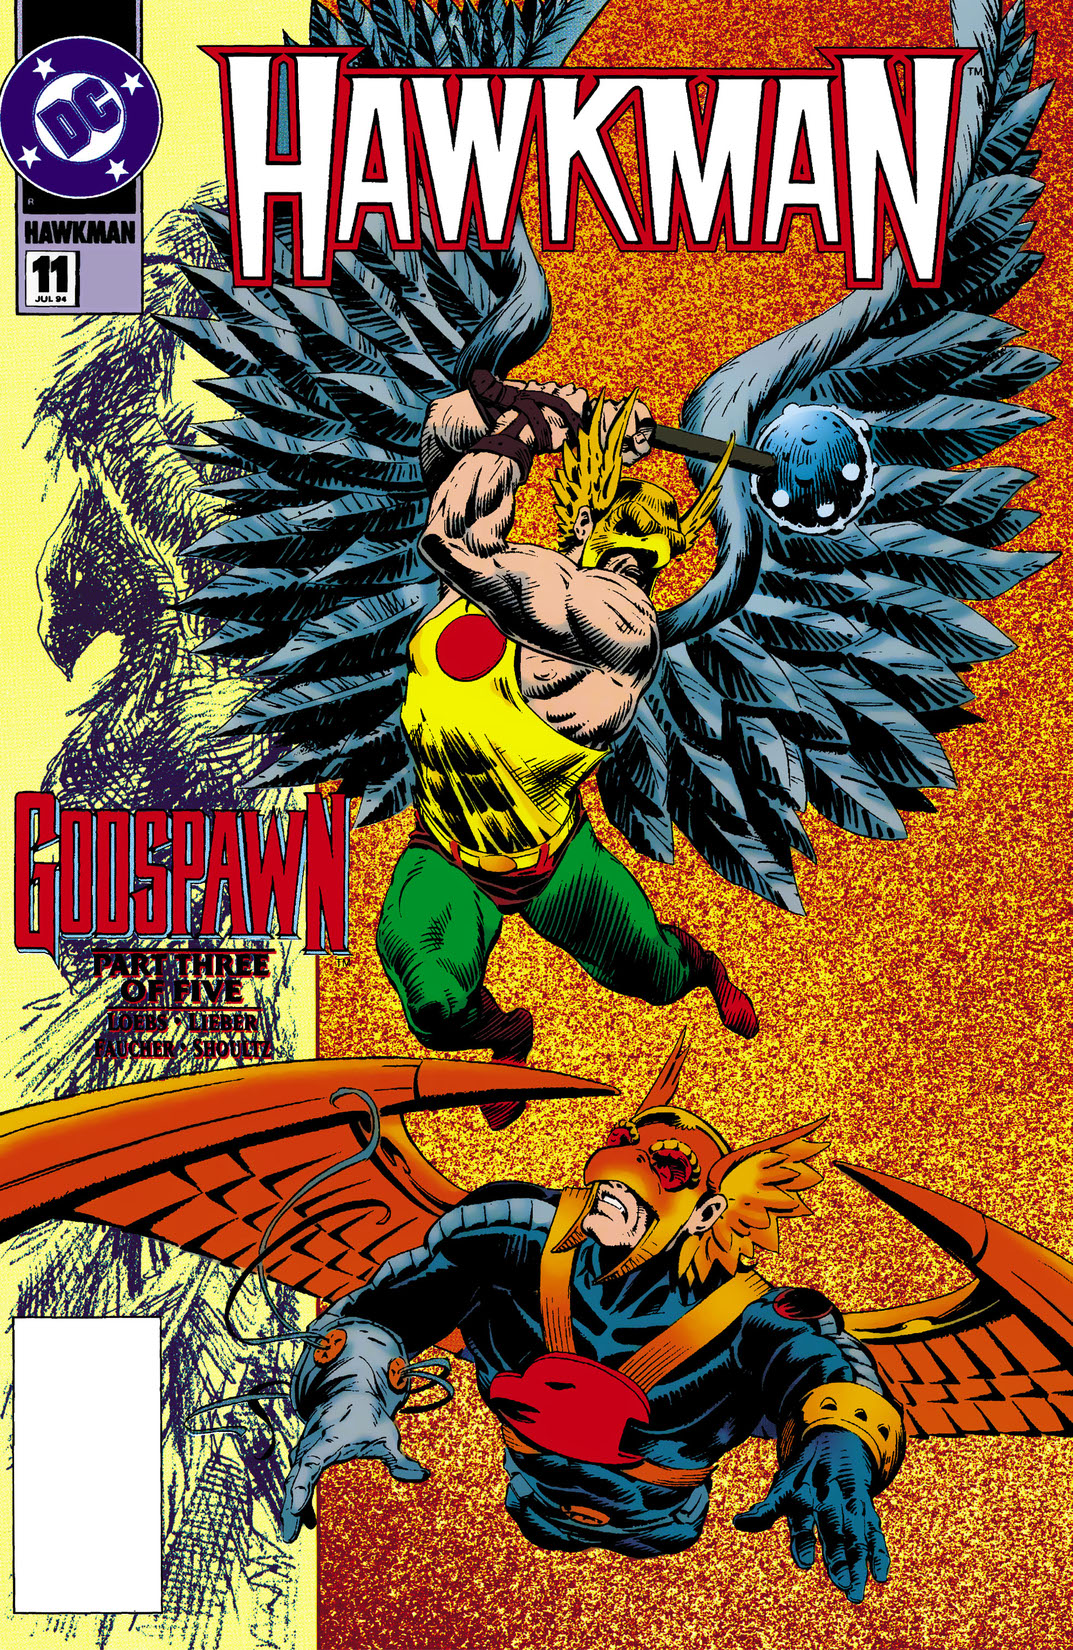 Hawkman (1993-) #11 preview images